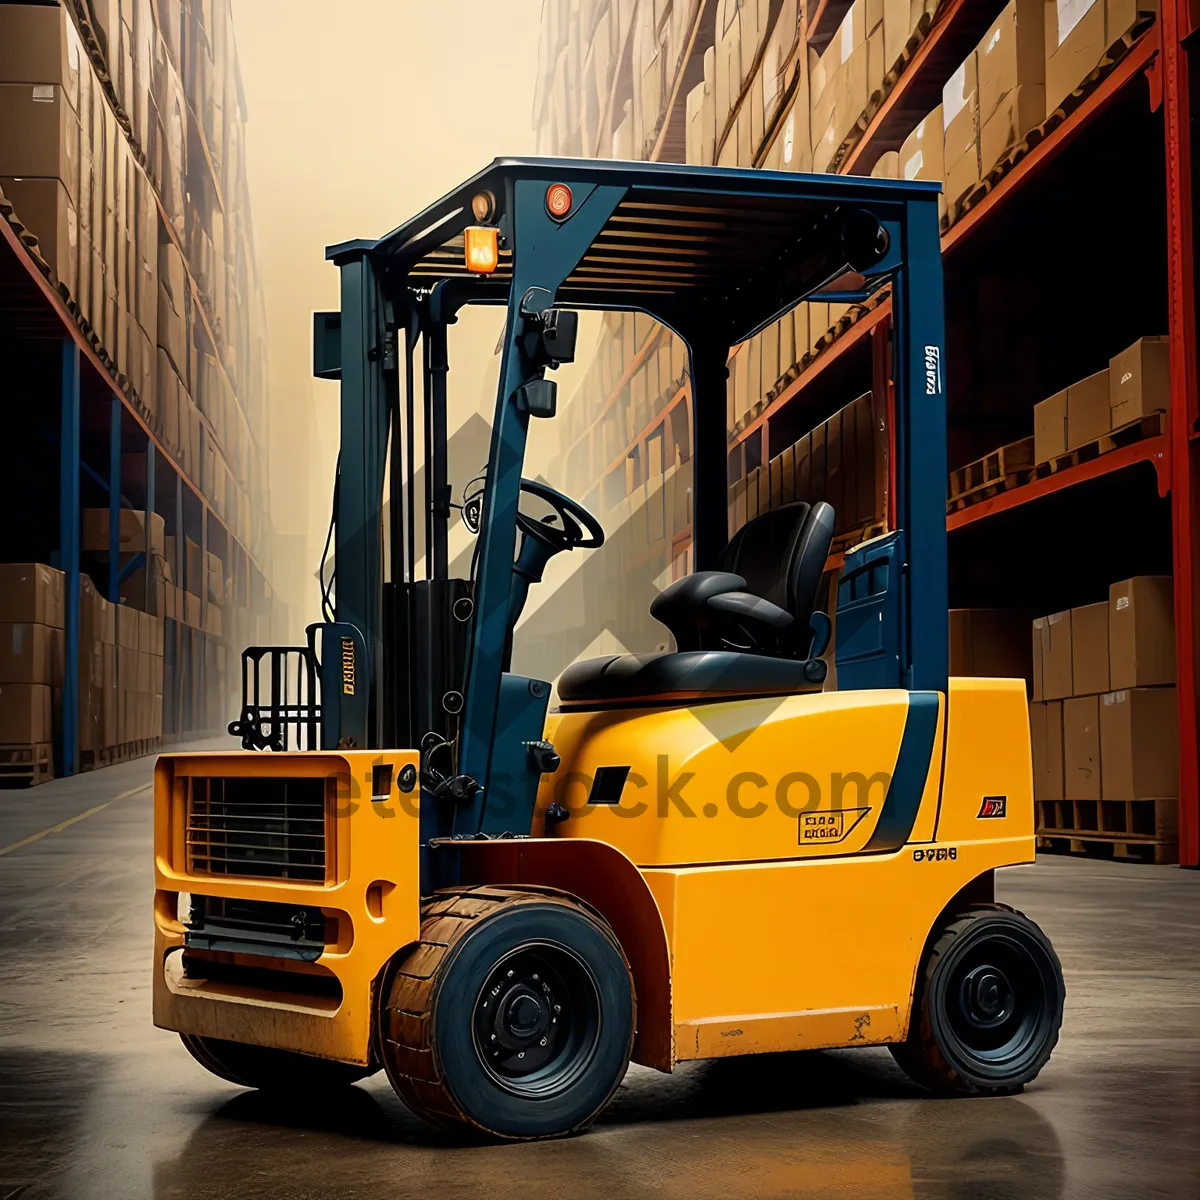 Picture of Heavy-duty forklift truck transporting industrial cargo.